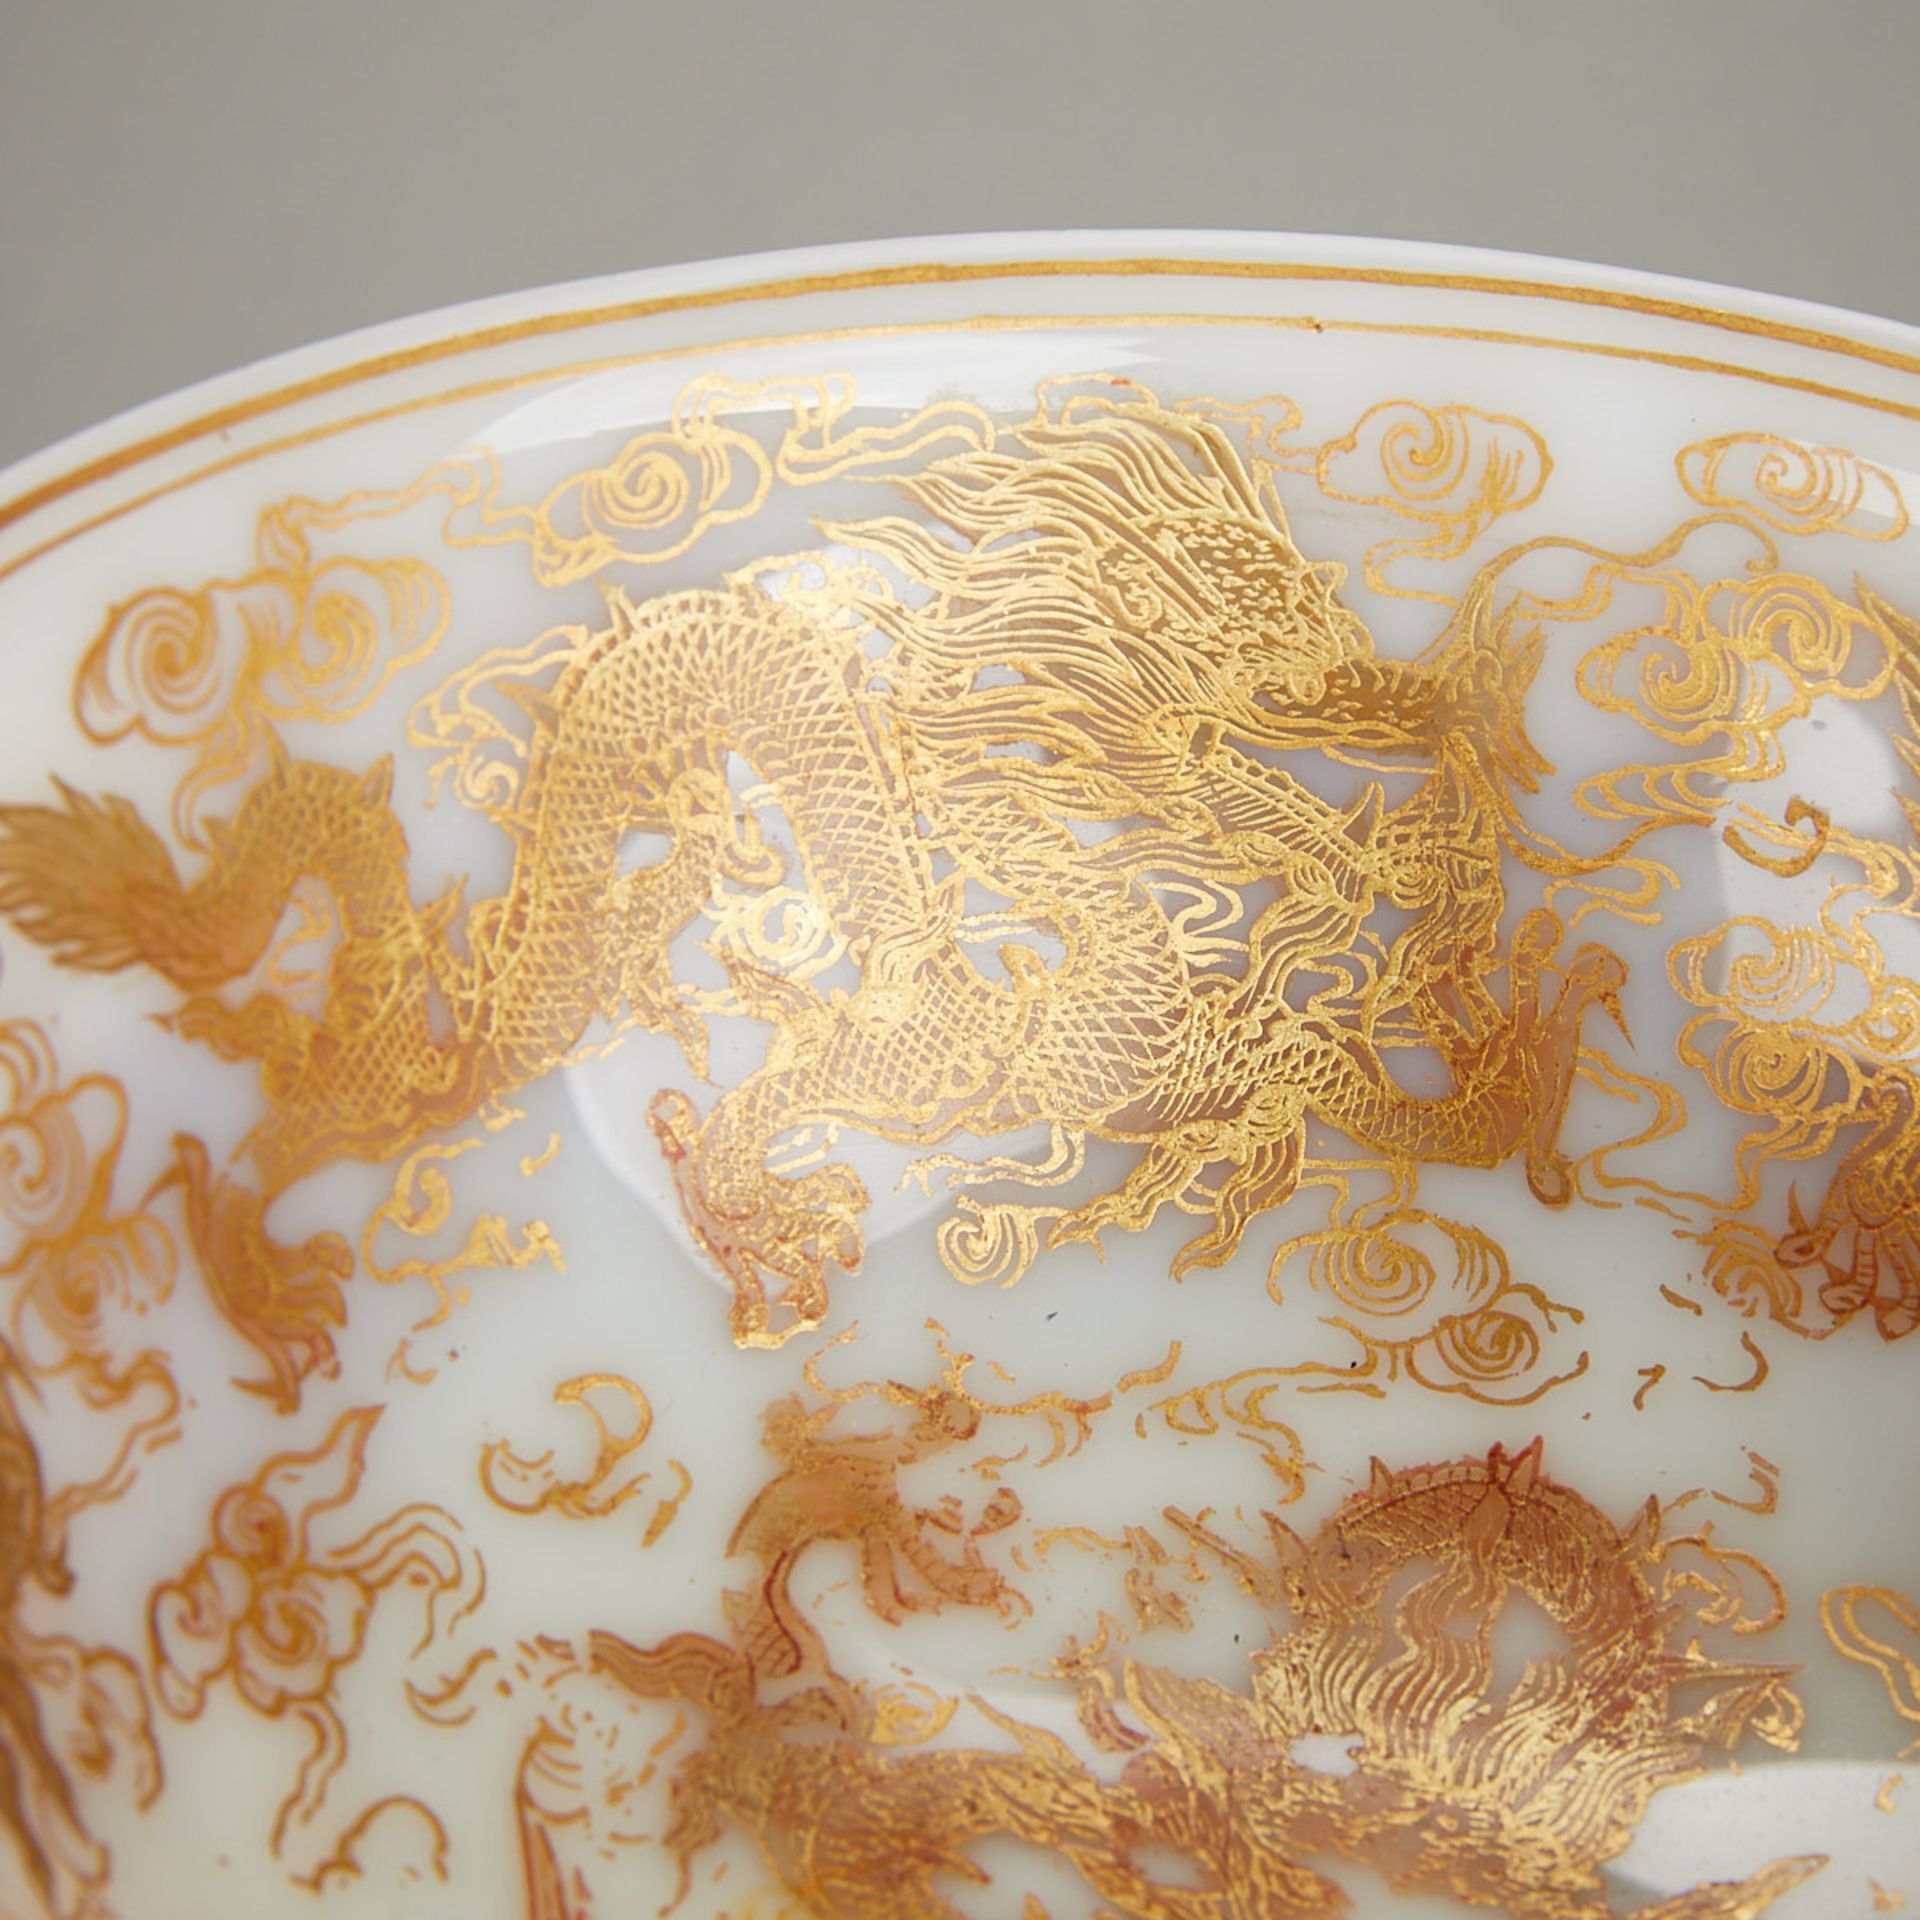 Rare Chinese Gilt Semi-Opaque White Glass Bowl - Image 8 of 16